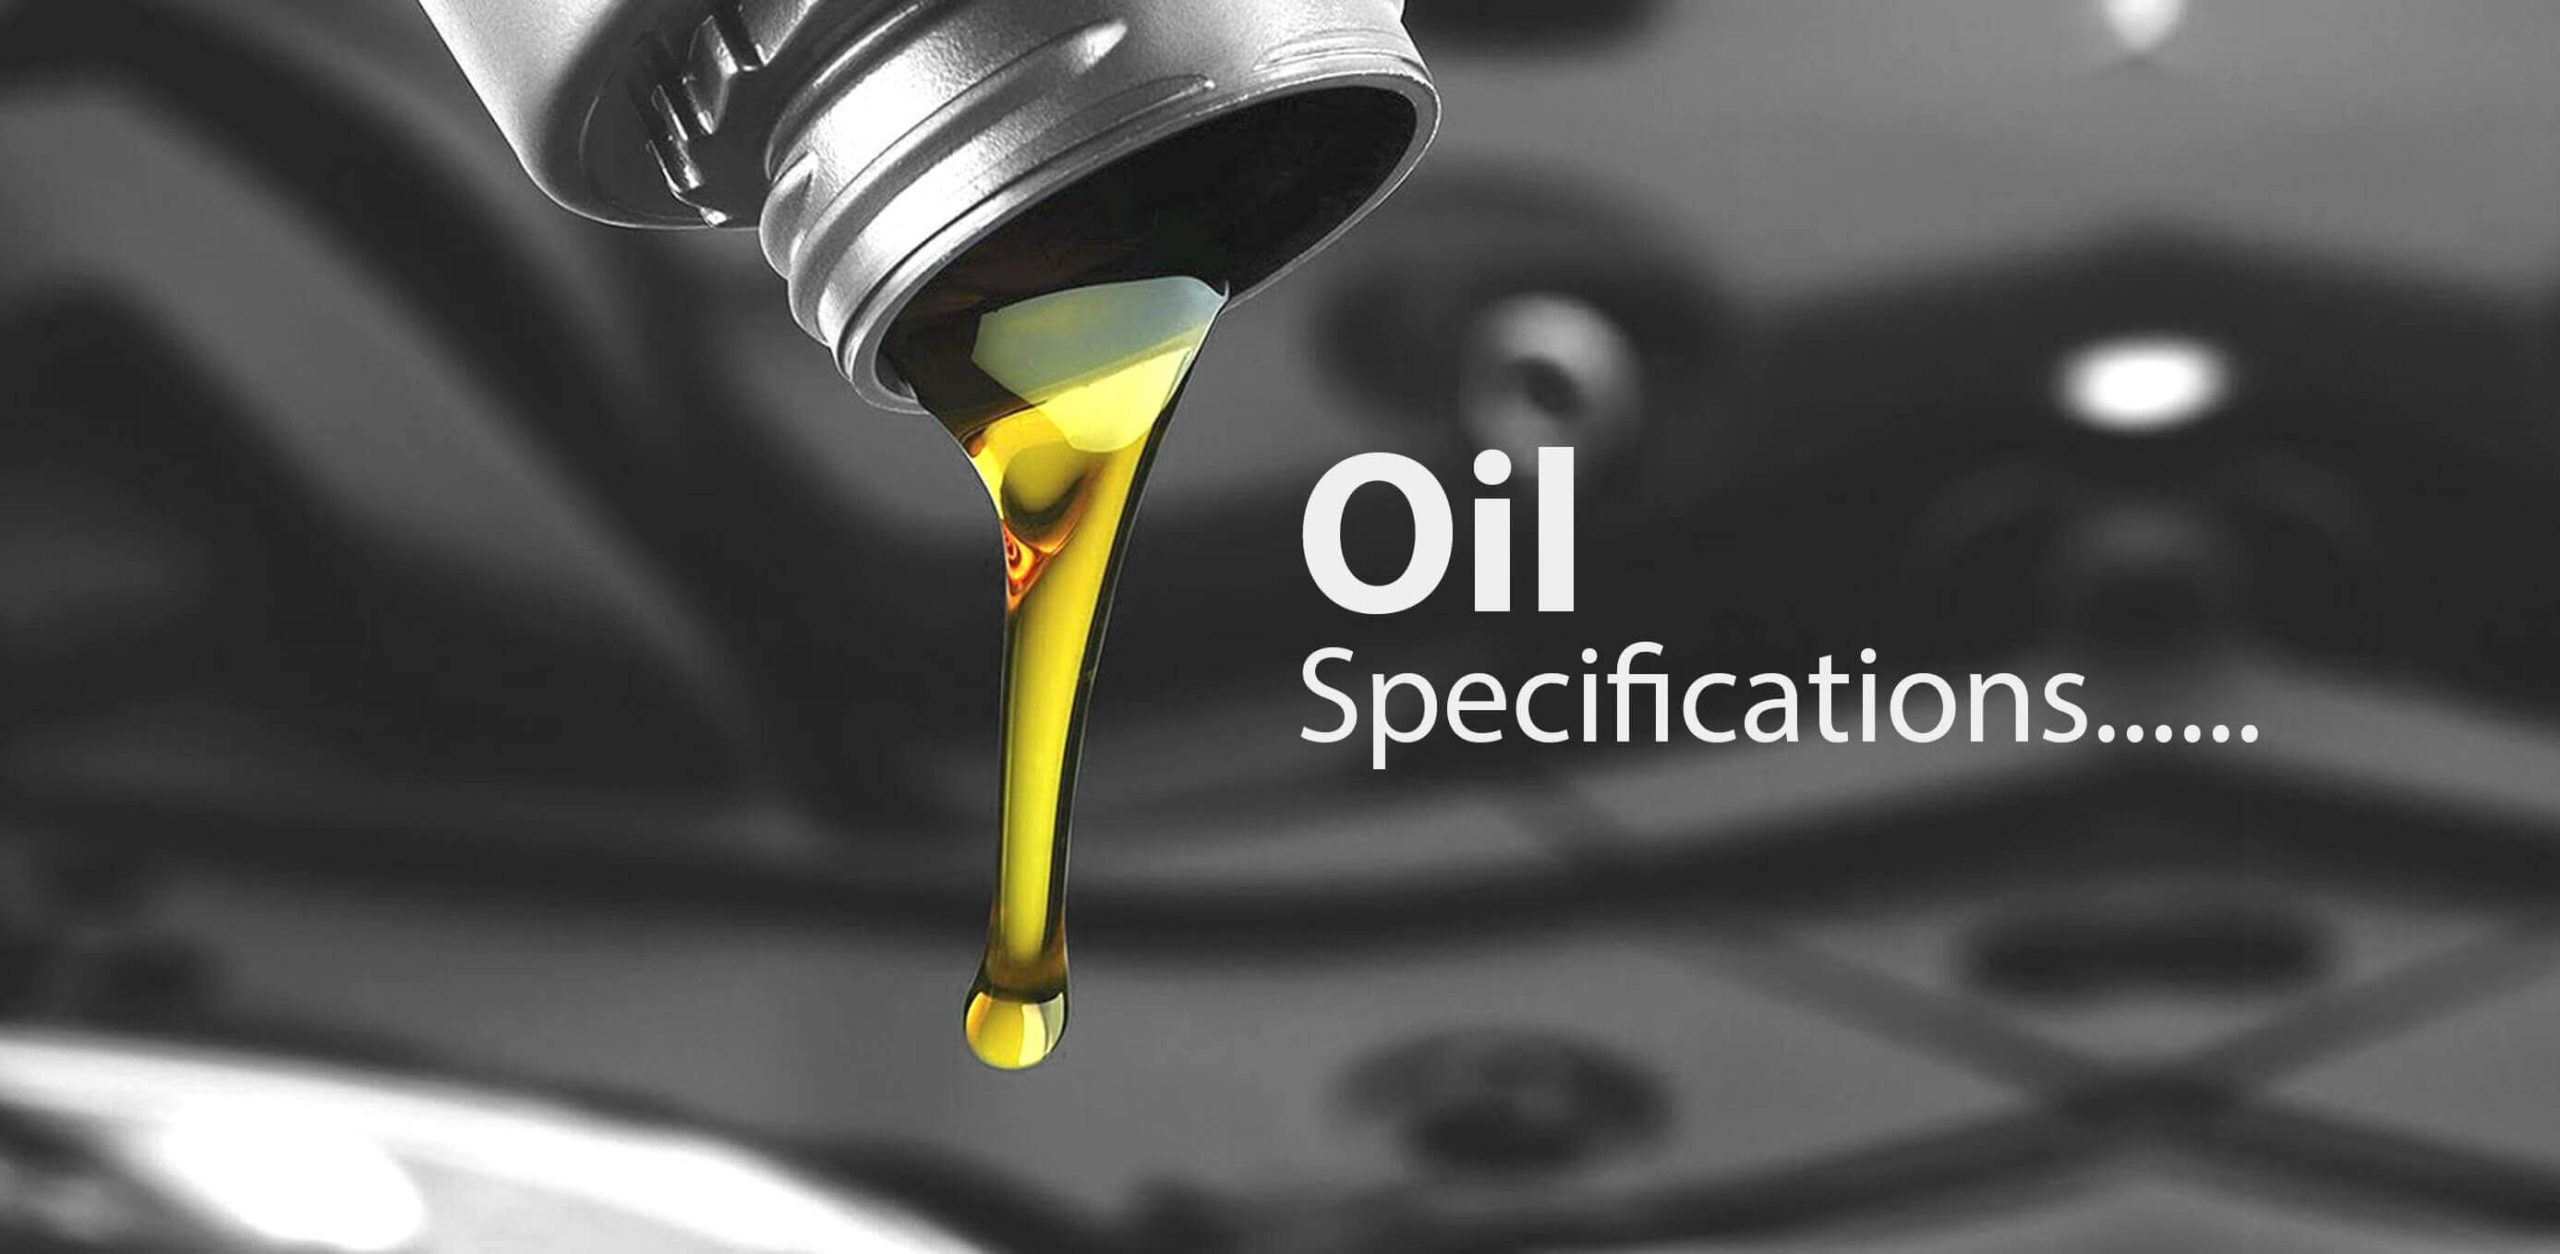 SAE 12 Grade Oil Specifications